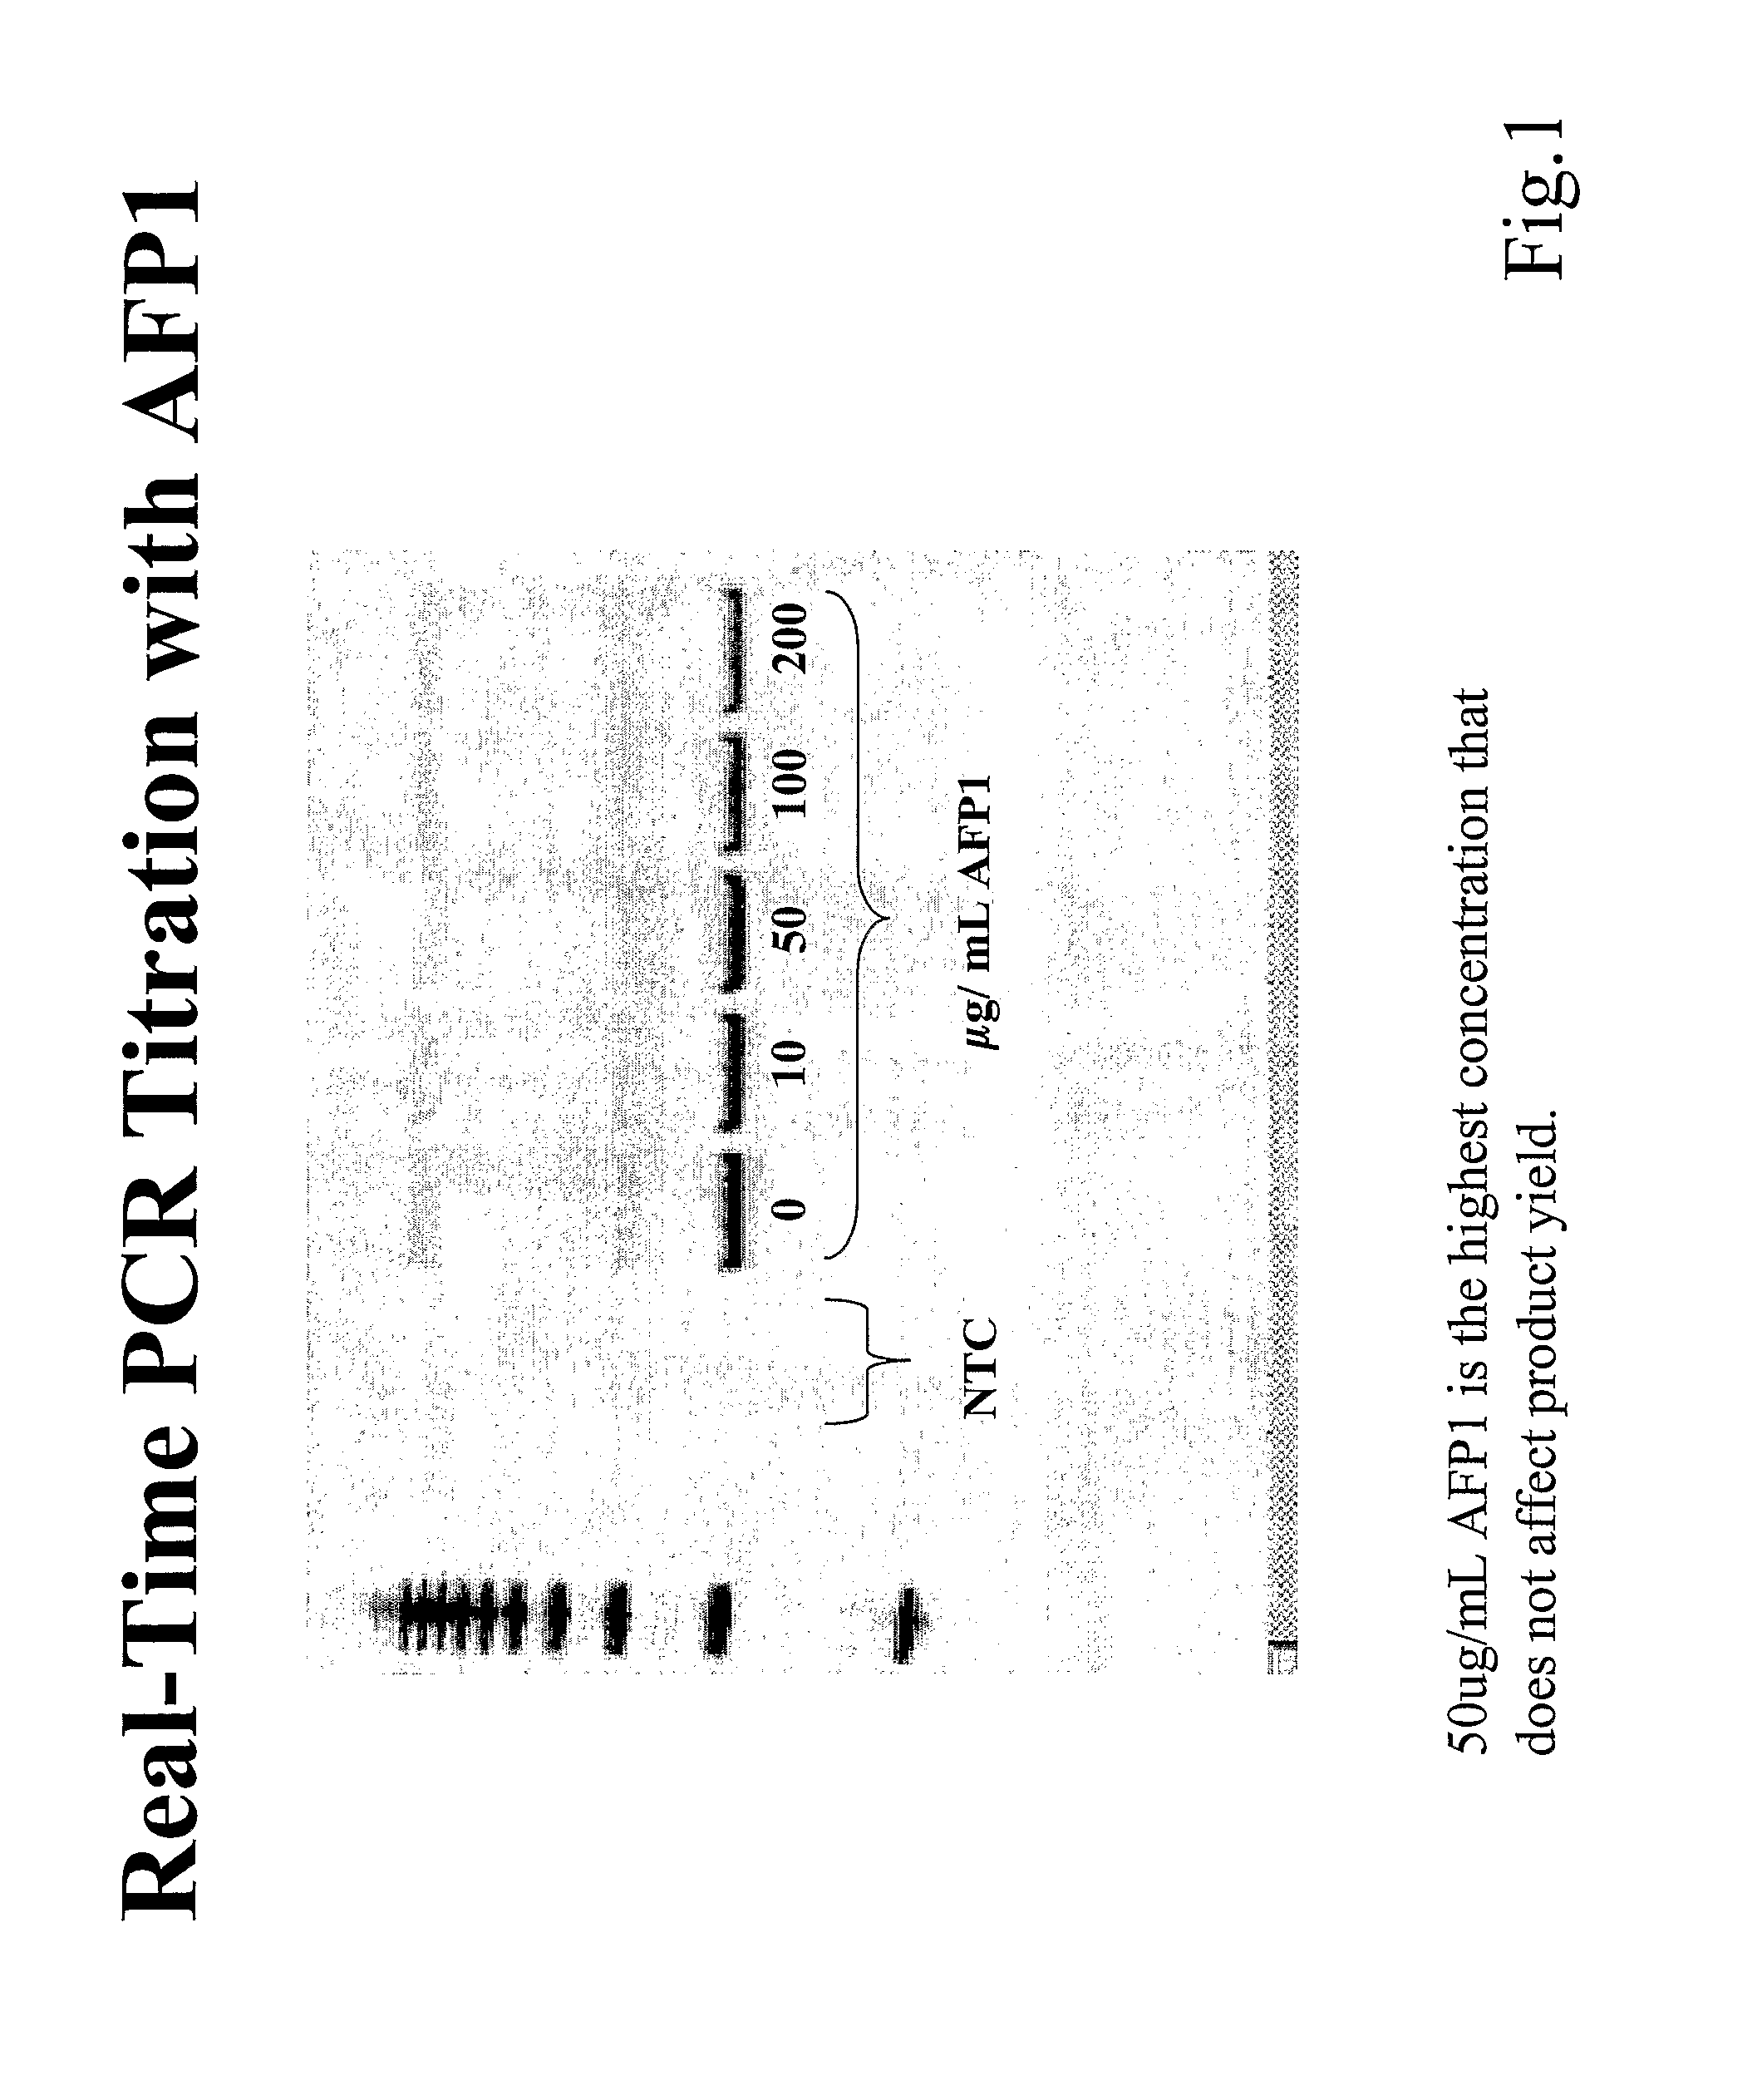 Anti-freeze protein enhanced nucleic acid amplification